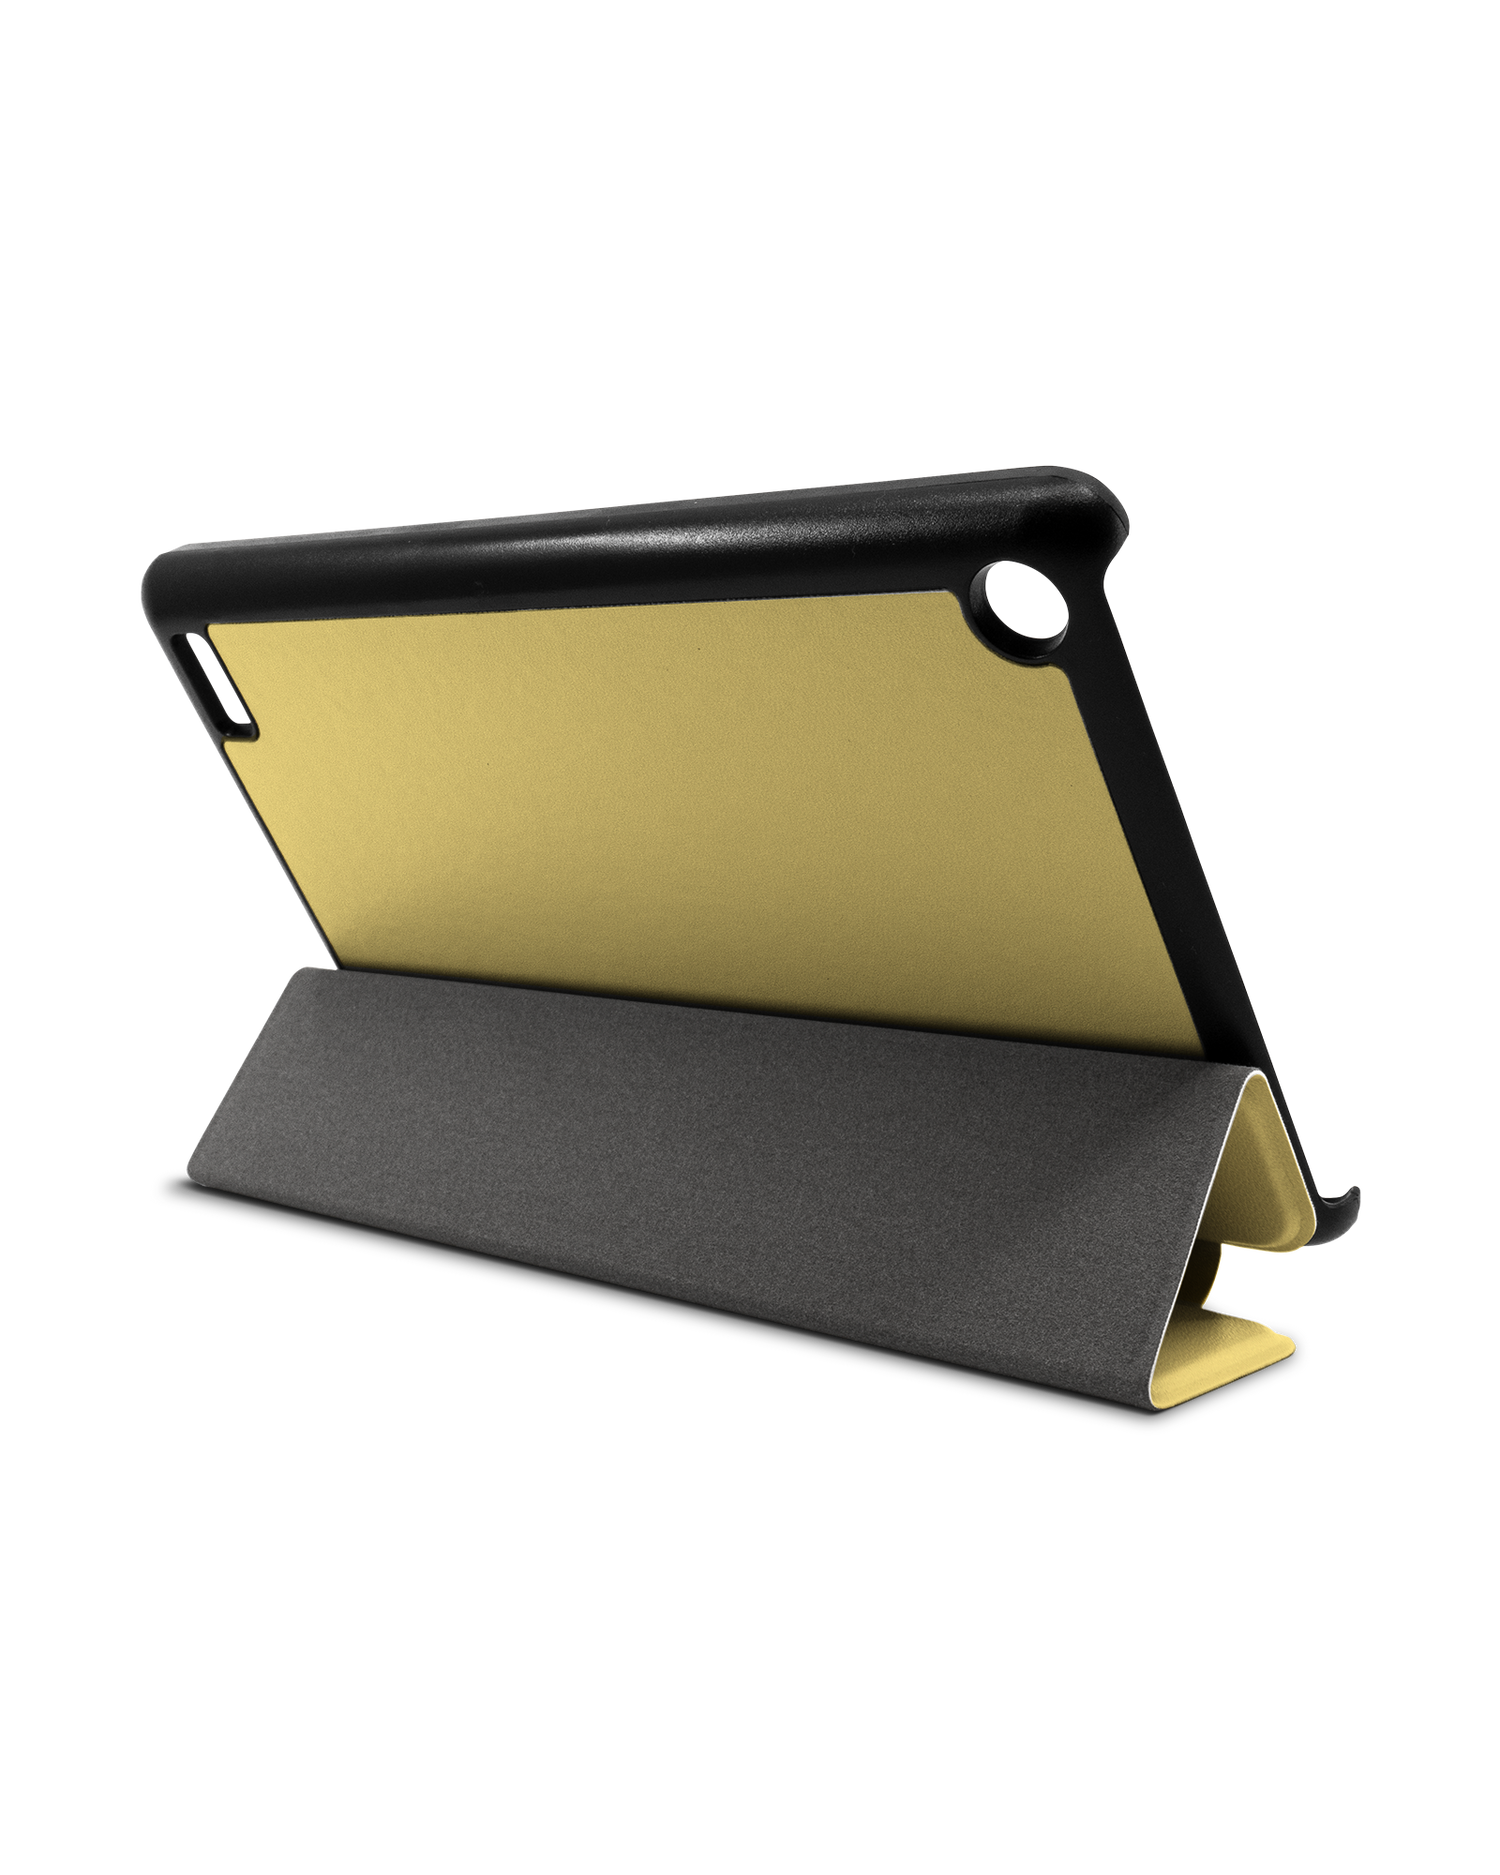 LIGHT YELLOW Tablet Smart Case for Amazon Fire 7: Used as Stand